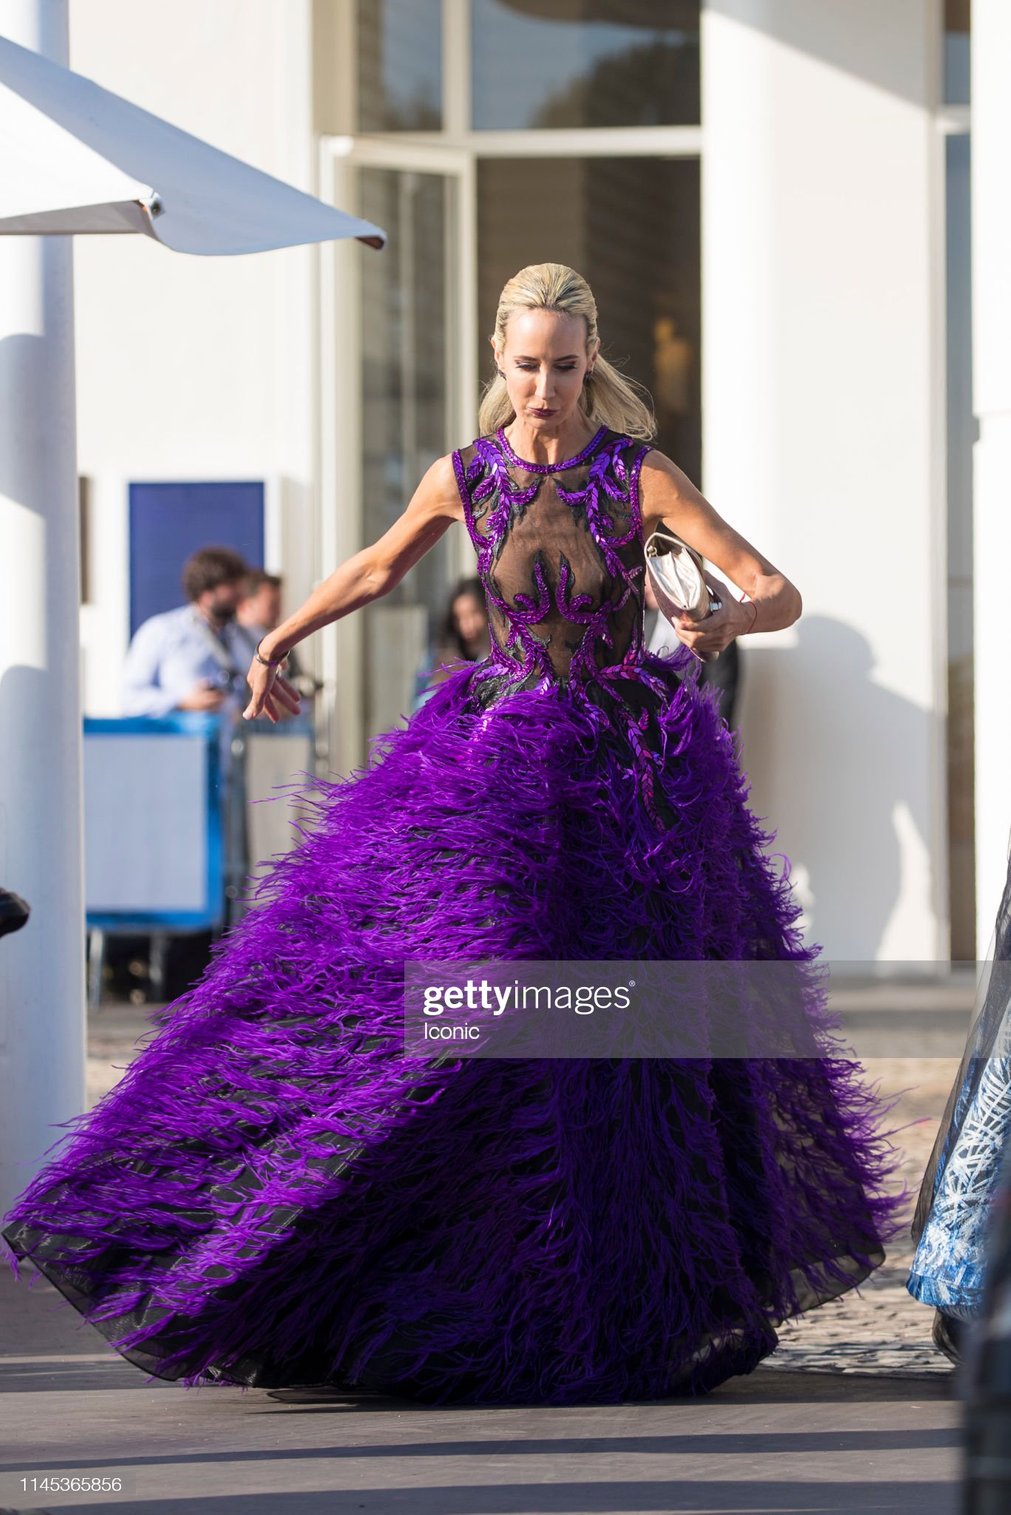 Celebrity Sightings At The 72nd Annual Cannes Film Festival - Day 8 : News Photo